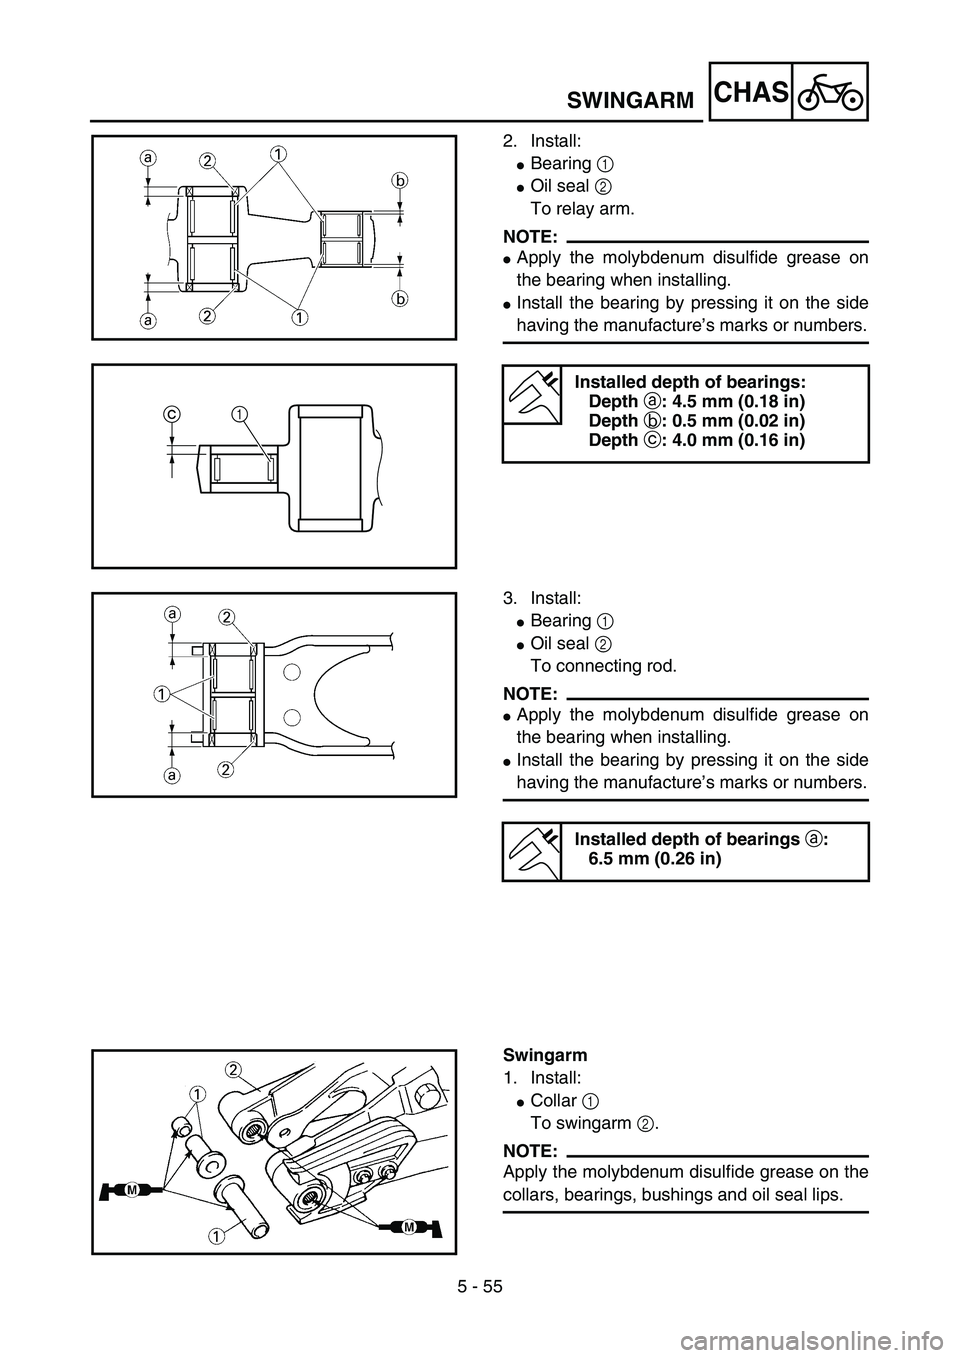 YAMAHA YZ85 2004  Notices Demploi (in French) 5 - 55
CHAS
2. Install:
Bearing 1 
Oil seal 2 
To relay arm.
NOTE:
Apply the molybdenum disulfide grease on
the bearing when installing.
Install the bearing by pressing it on the side
having the m